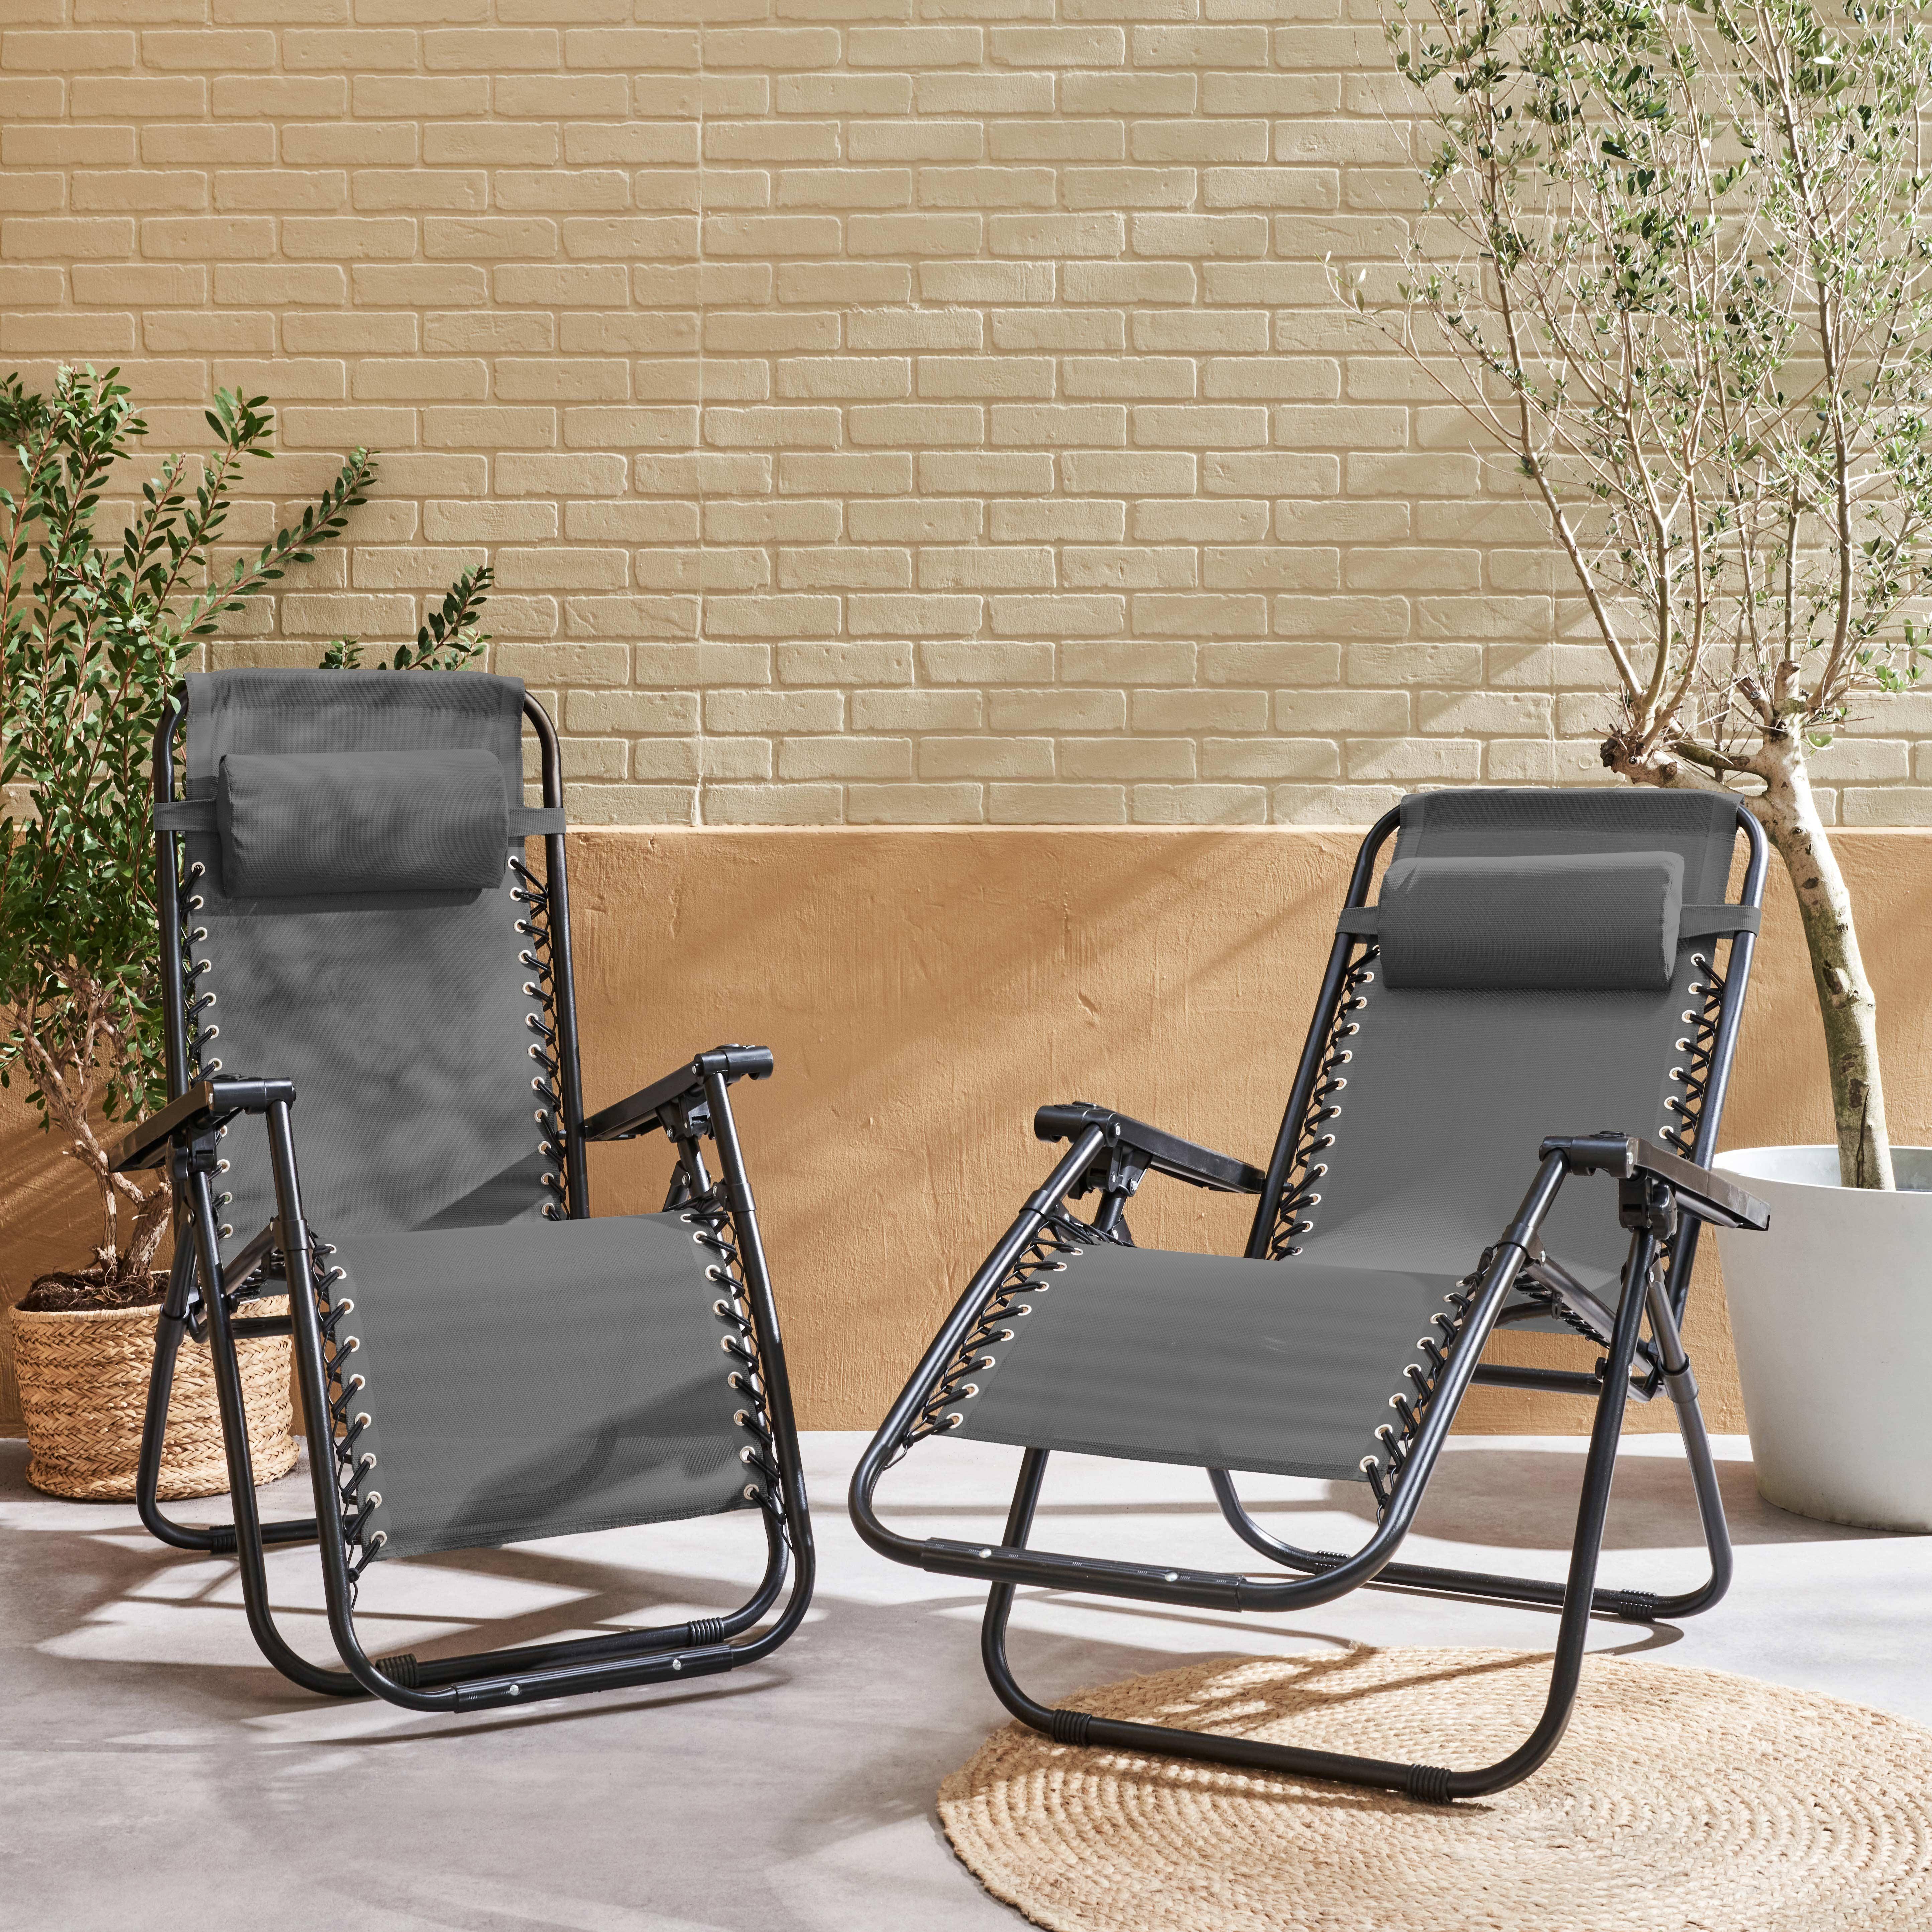 2 textilene reclining chairs - foldable, multi-position - Patrick - Anthracite,sweeek,Photo2